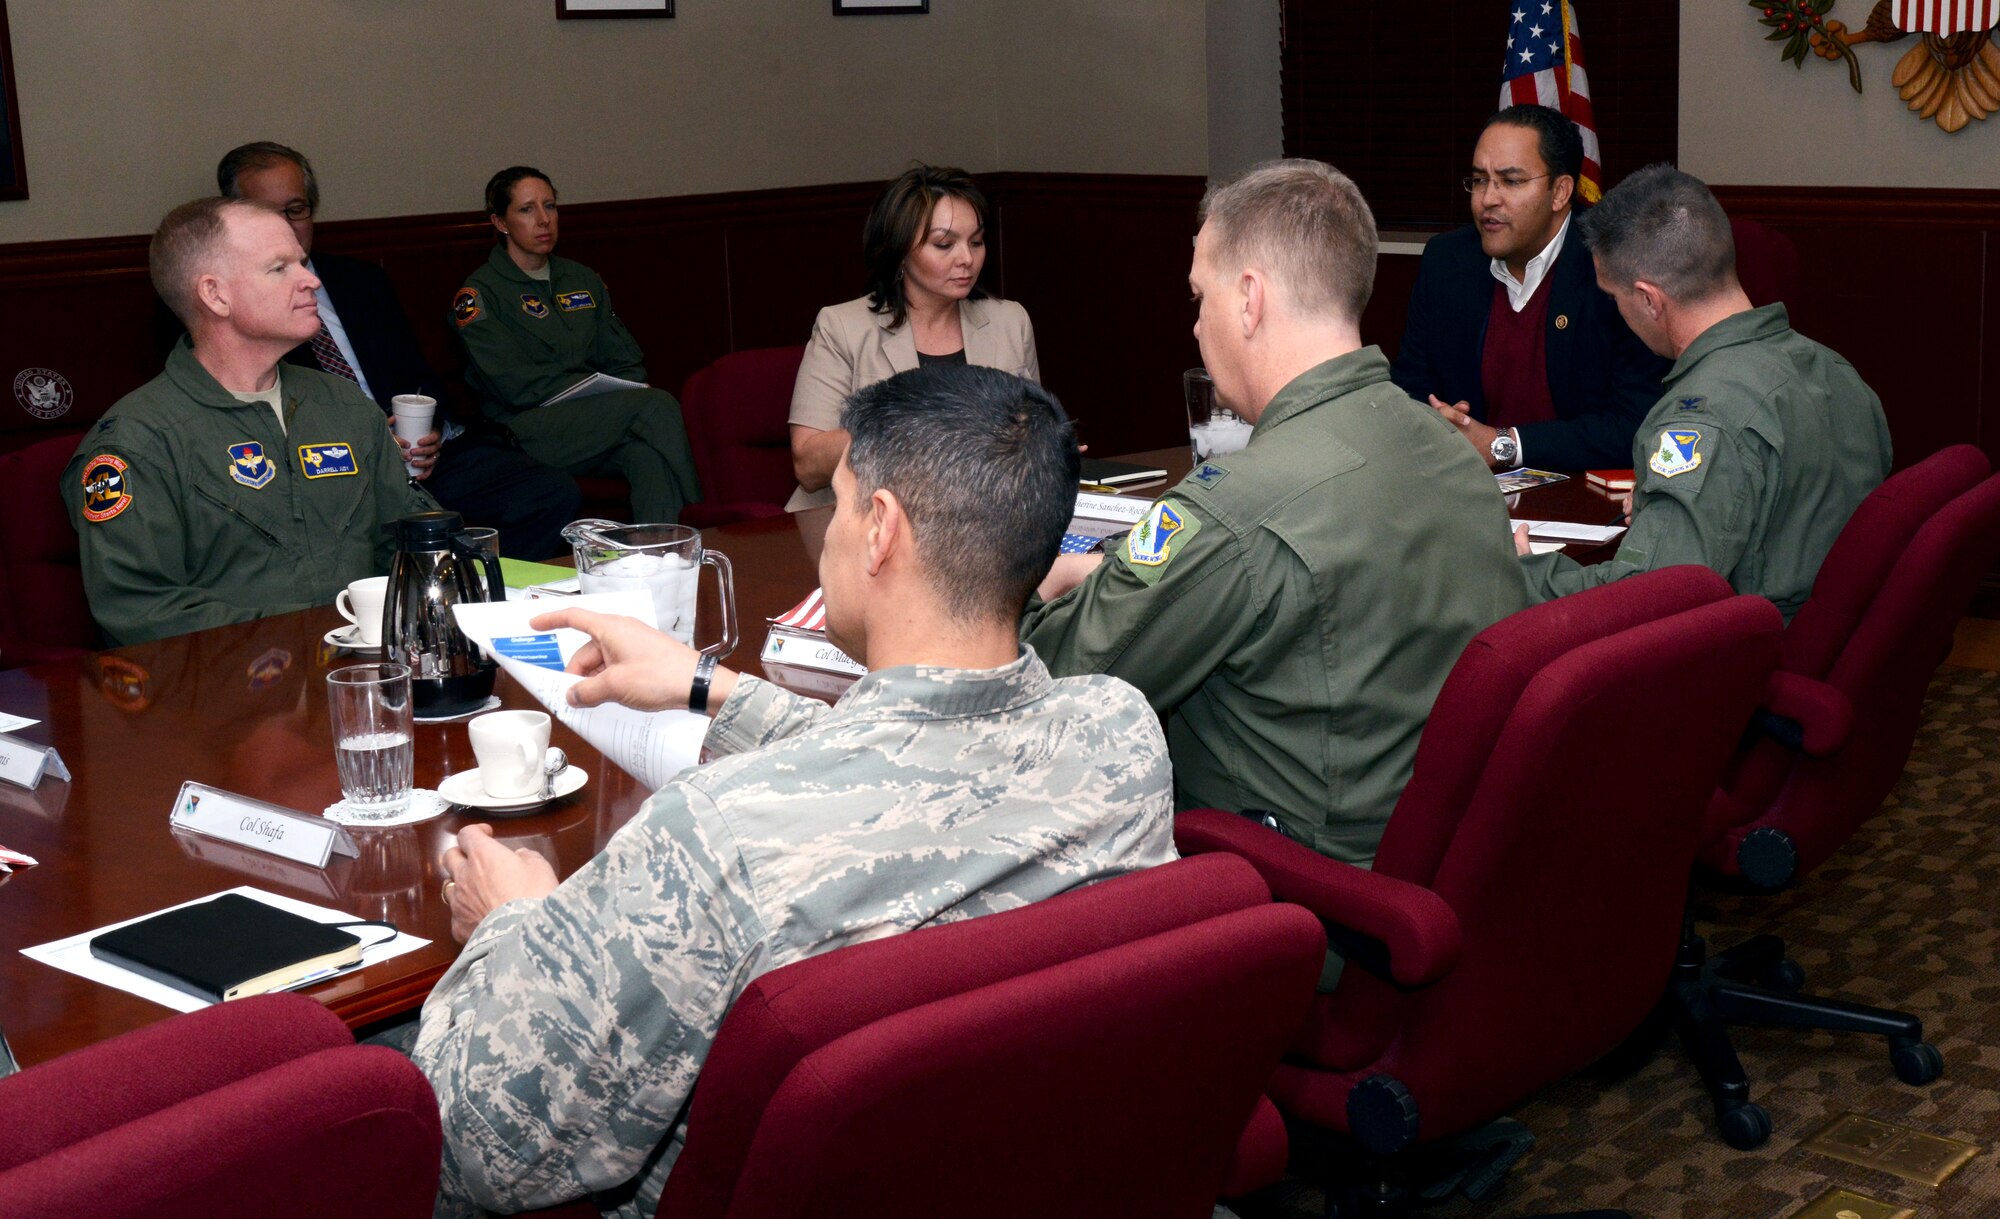 U.S. Rep. Will Hurd, Texas’ 23rd Congressional District congressman, visits with leadership from the 47th Flying Training Wing at Laughlin Air Force Base, Texas, Jan. 10, 2015. The congressman was visiting Laughlin to learn more about the base’s pilot training mission; as part of a series of tours designed to familiarize himself with the roles of the military bases that fall within the congressman’s new district. (U.S. Air Force photo by Airman 1st Class Ariel D. Delgado)(Released)